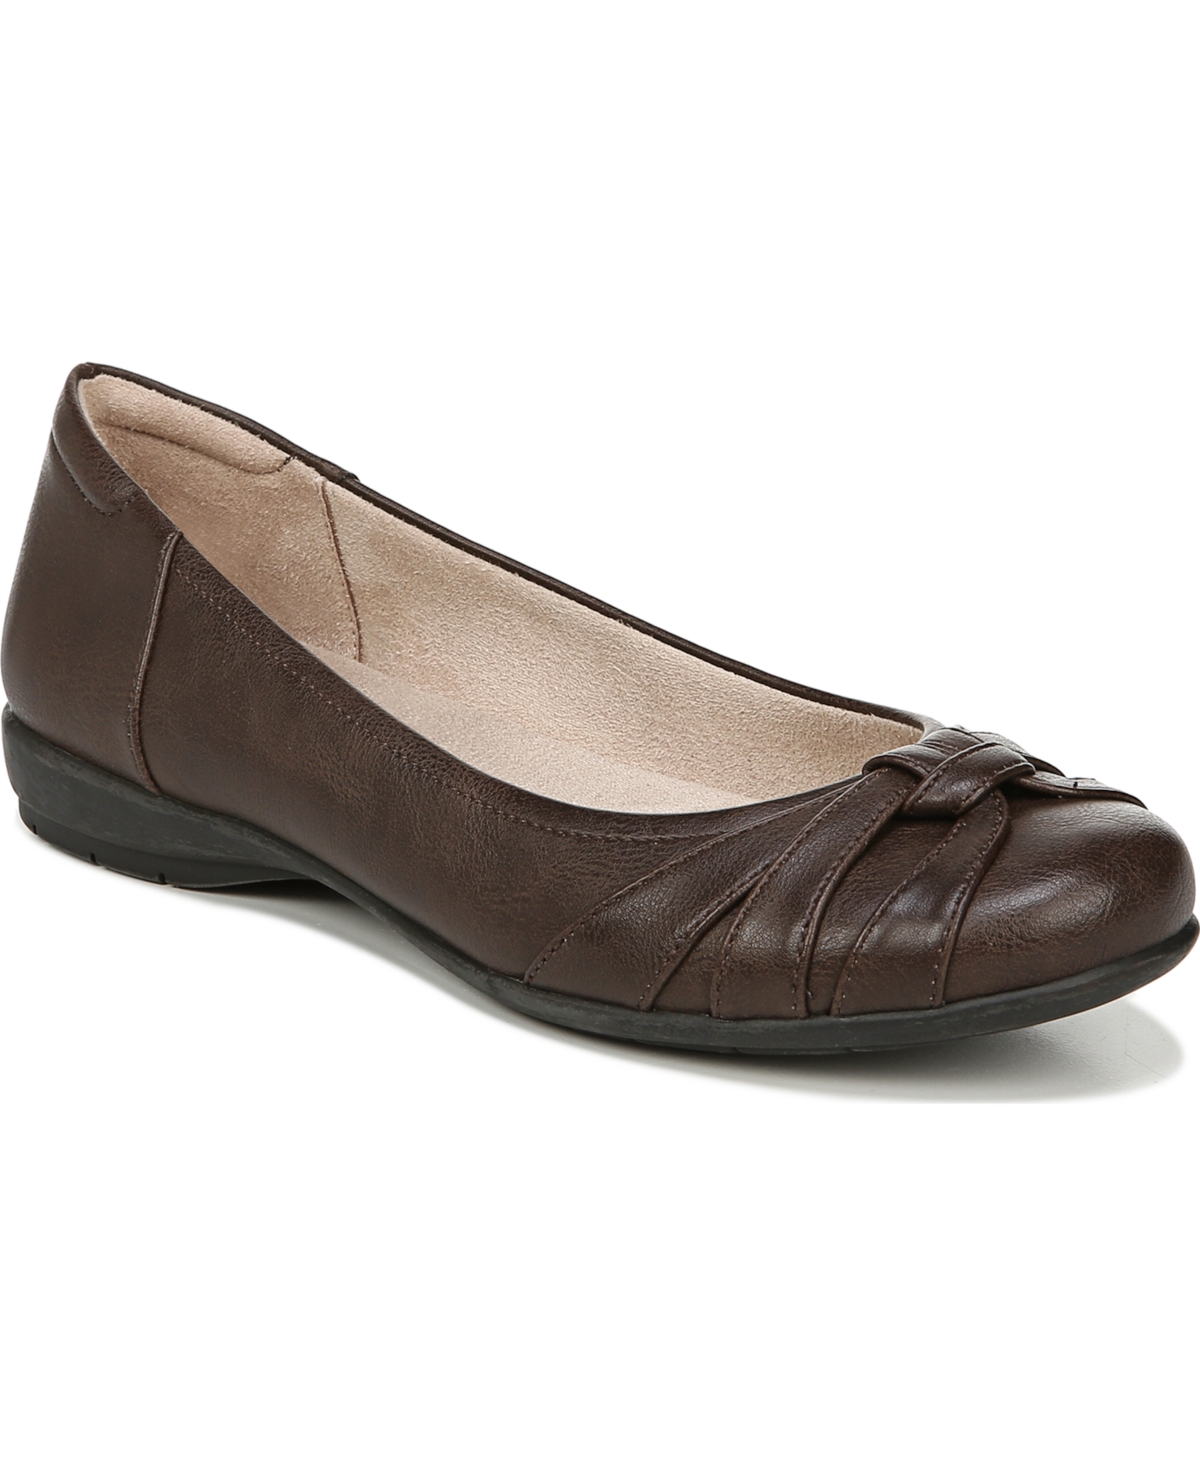 Gift Flats - Dark Brown Faux Leather